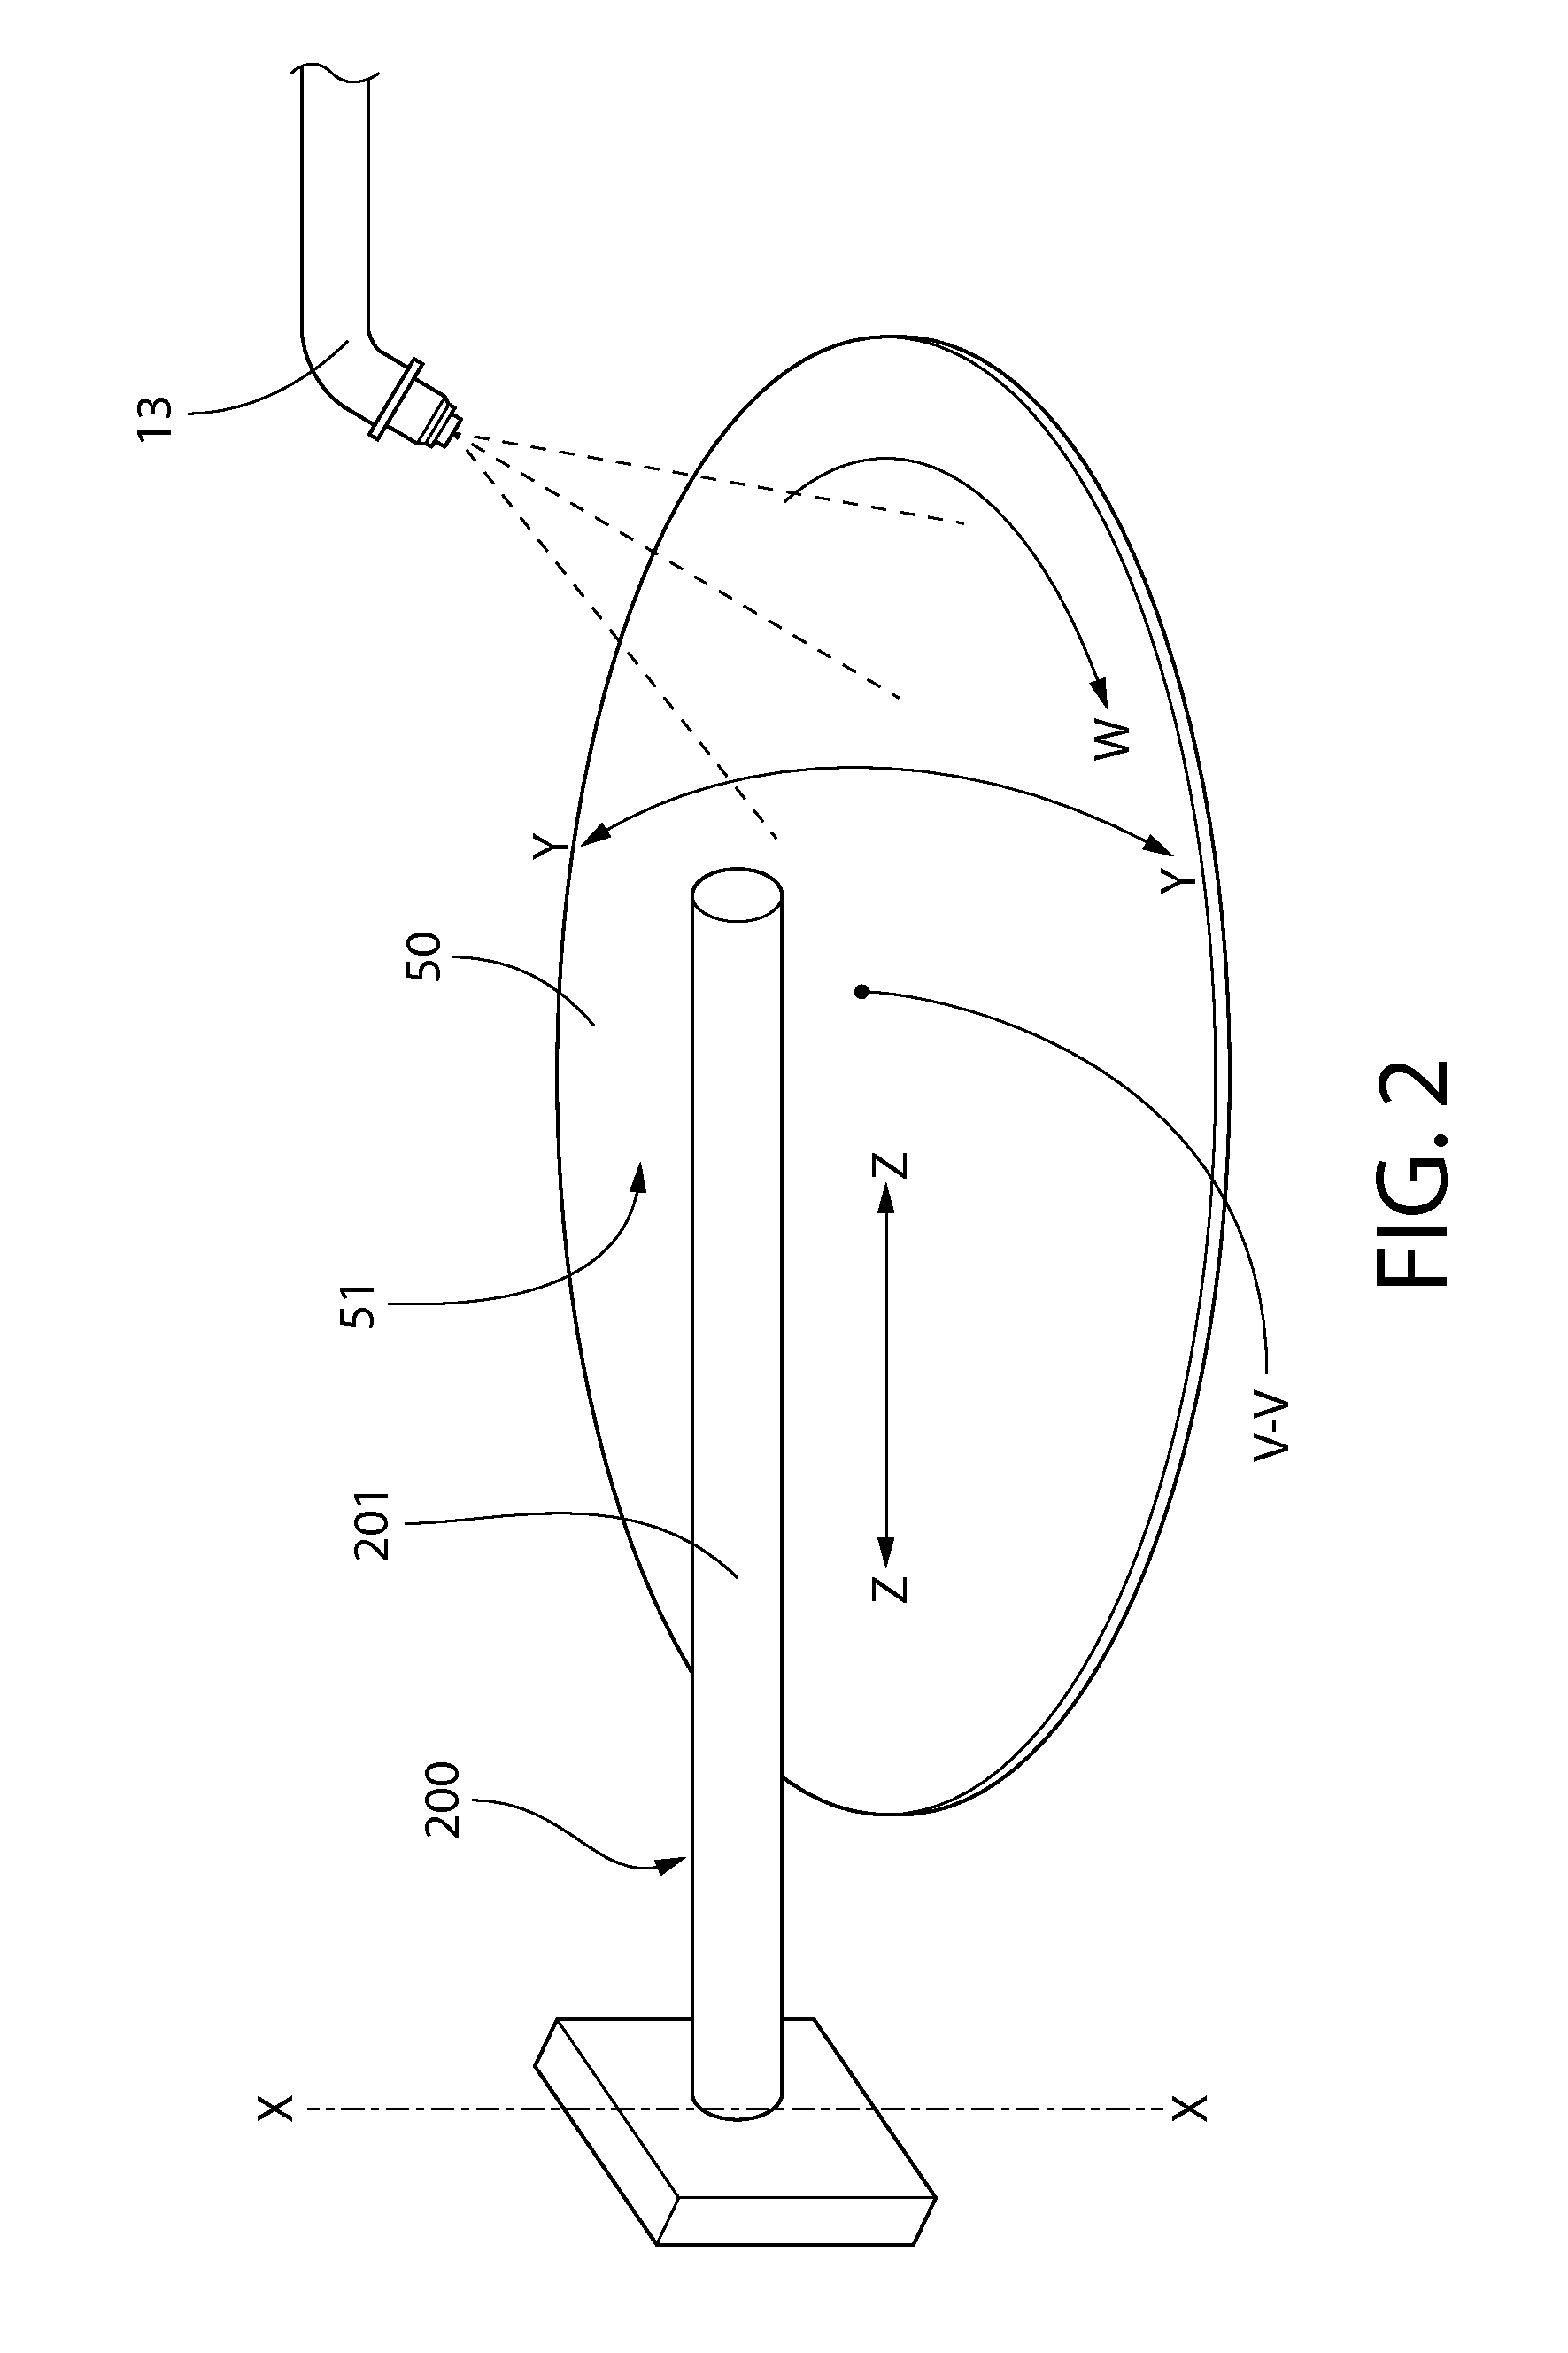 System, apparatus and method for processing substrates using acoustic energy